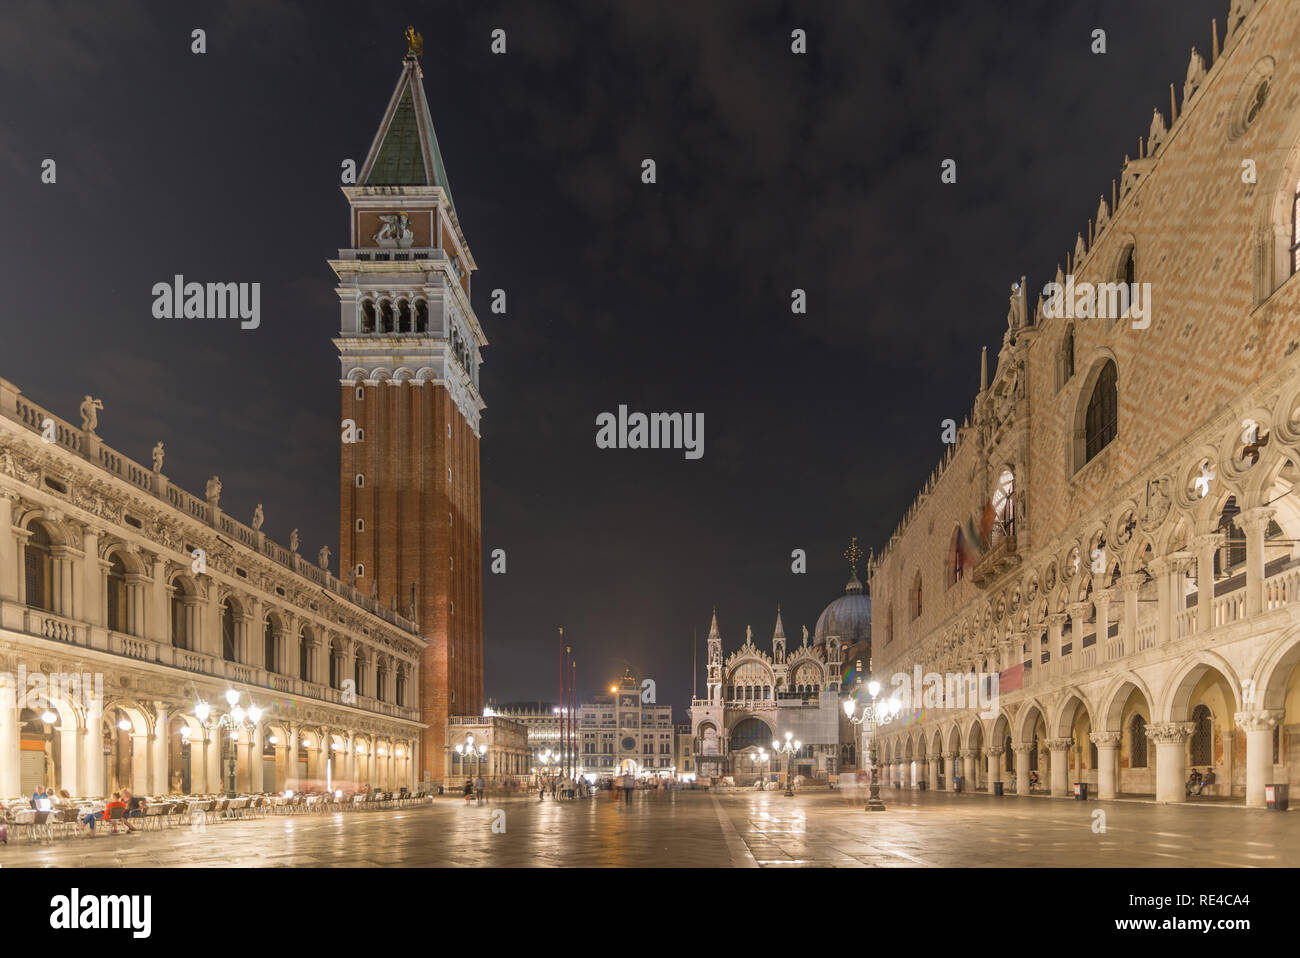 San Marco Square at night Stock Photo